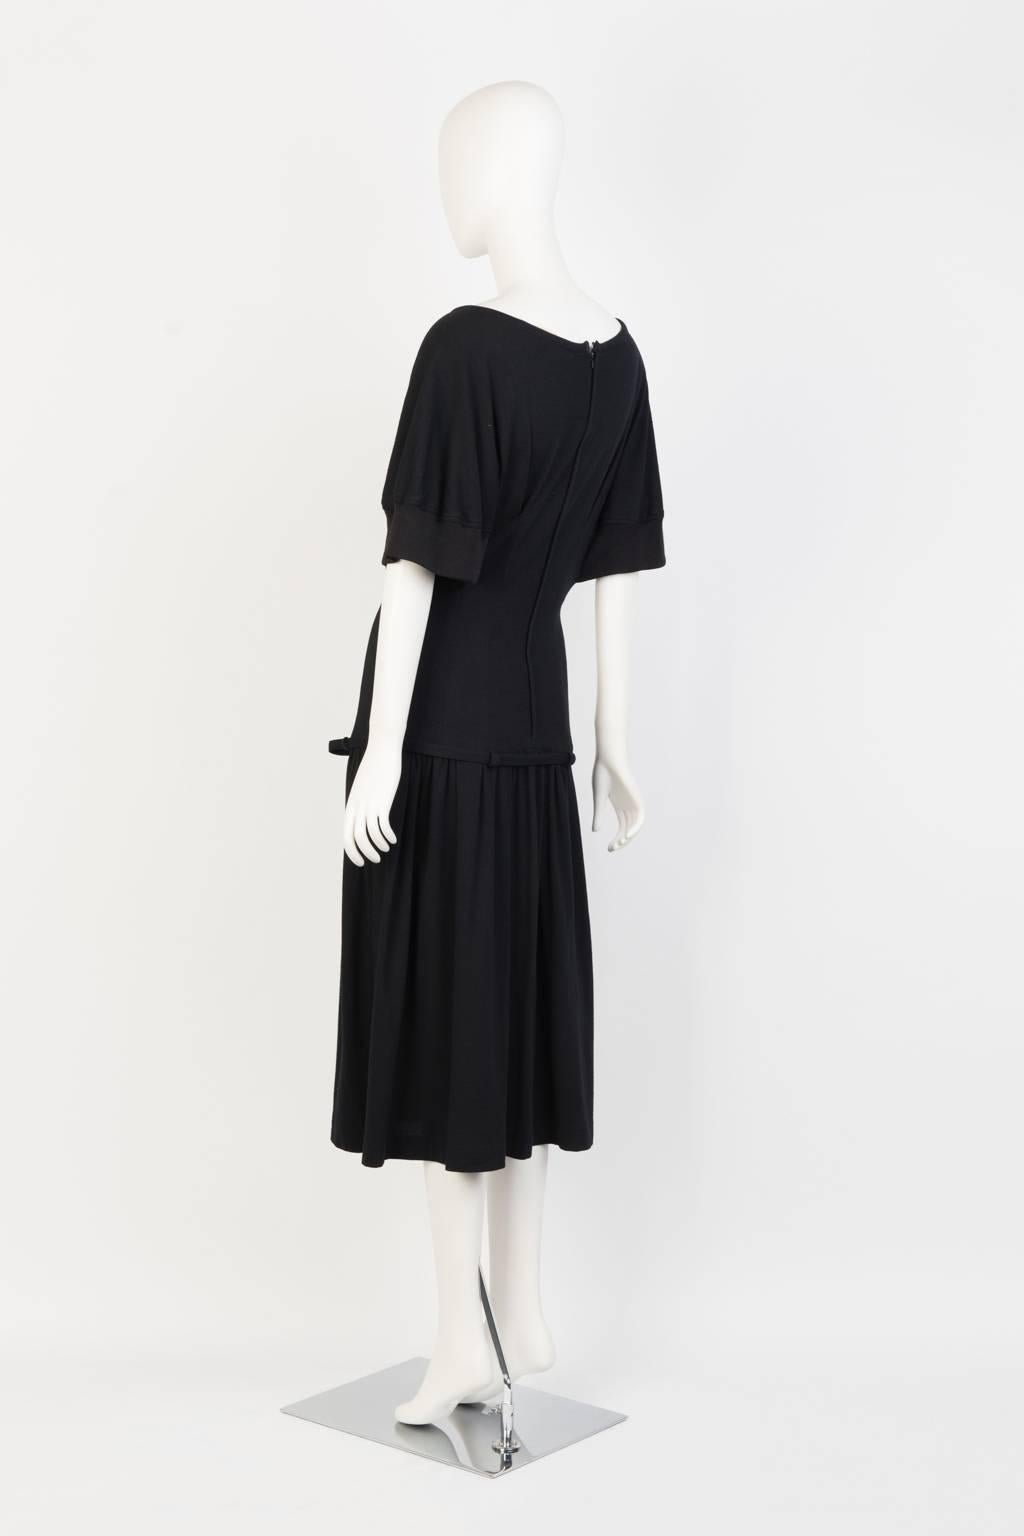 90s COMME des GARCONS Knit Dress In Good Condition For Sale In Xiamen, Fujian